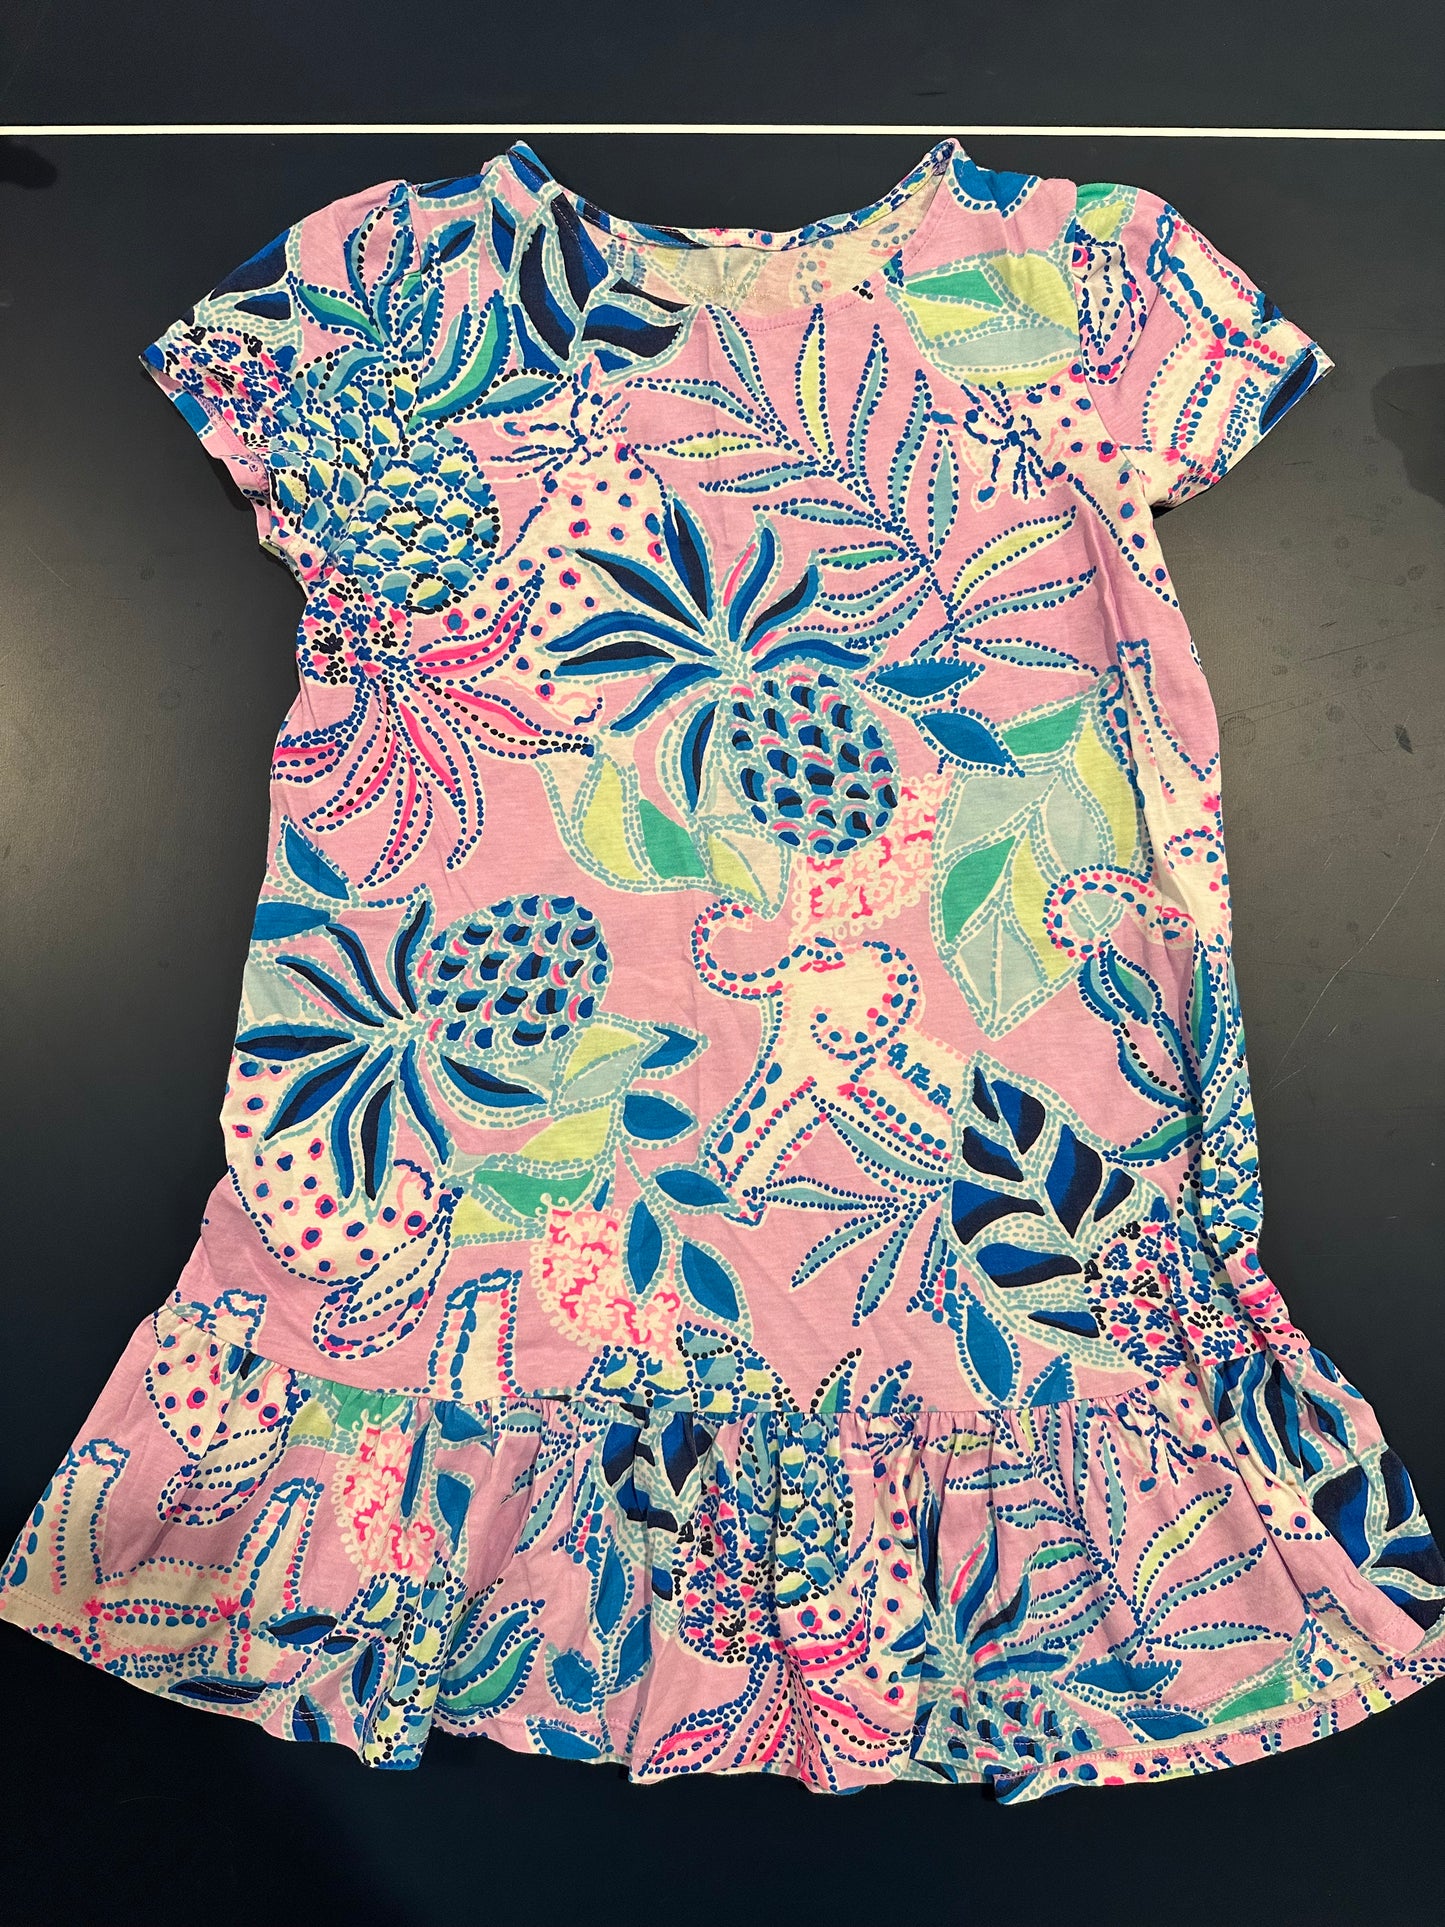 Lilly Pulitzer girls short length sleeve dress. Thin  Breathable materials,Girls size L 8-10